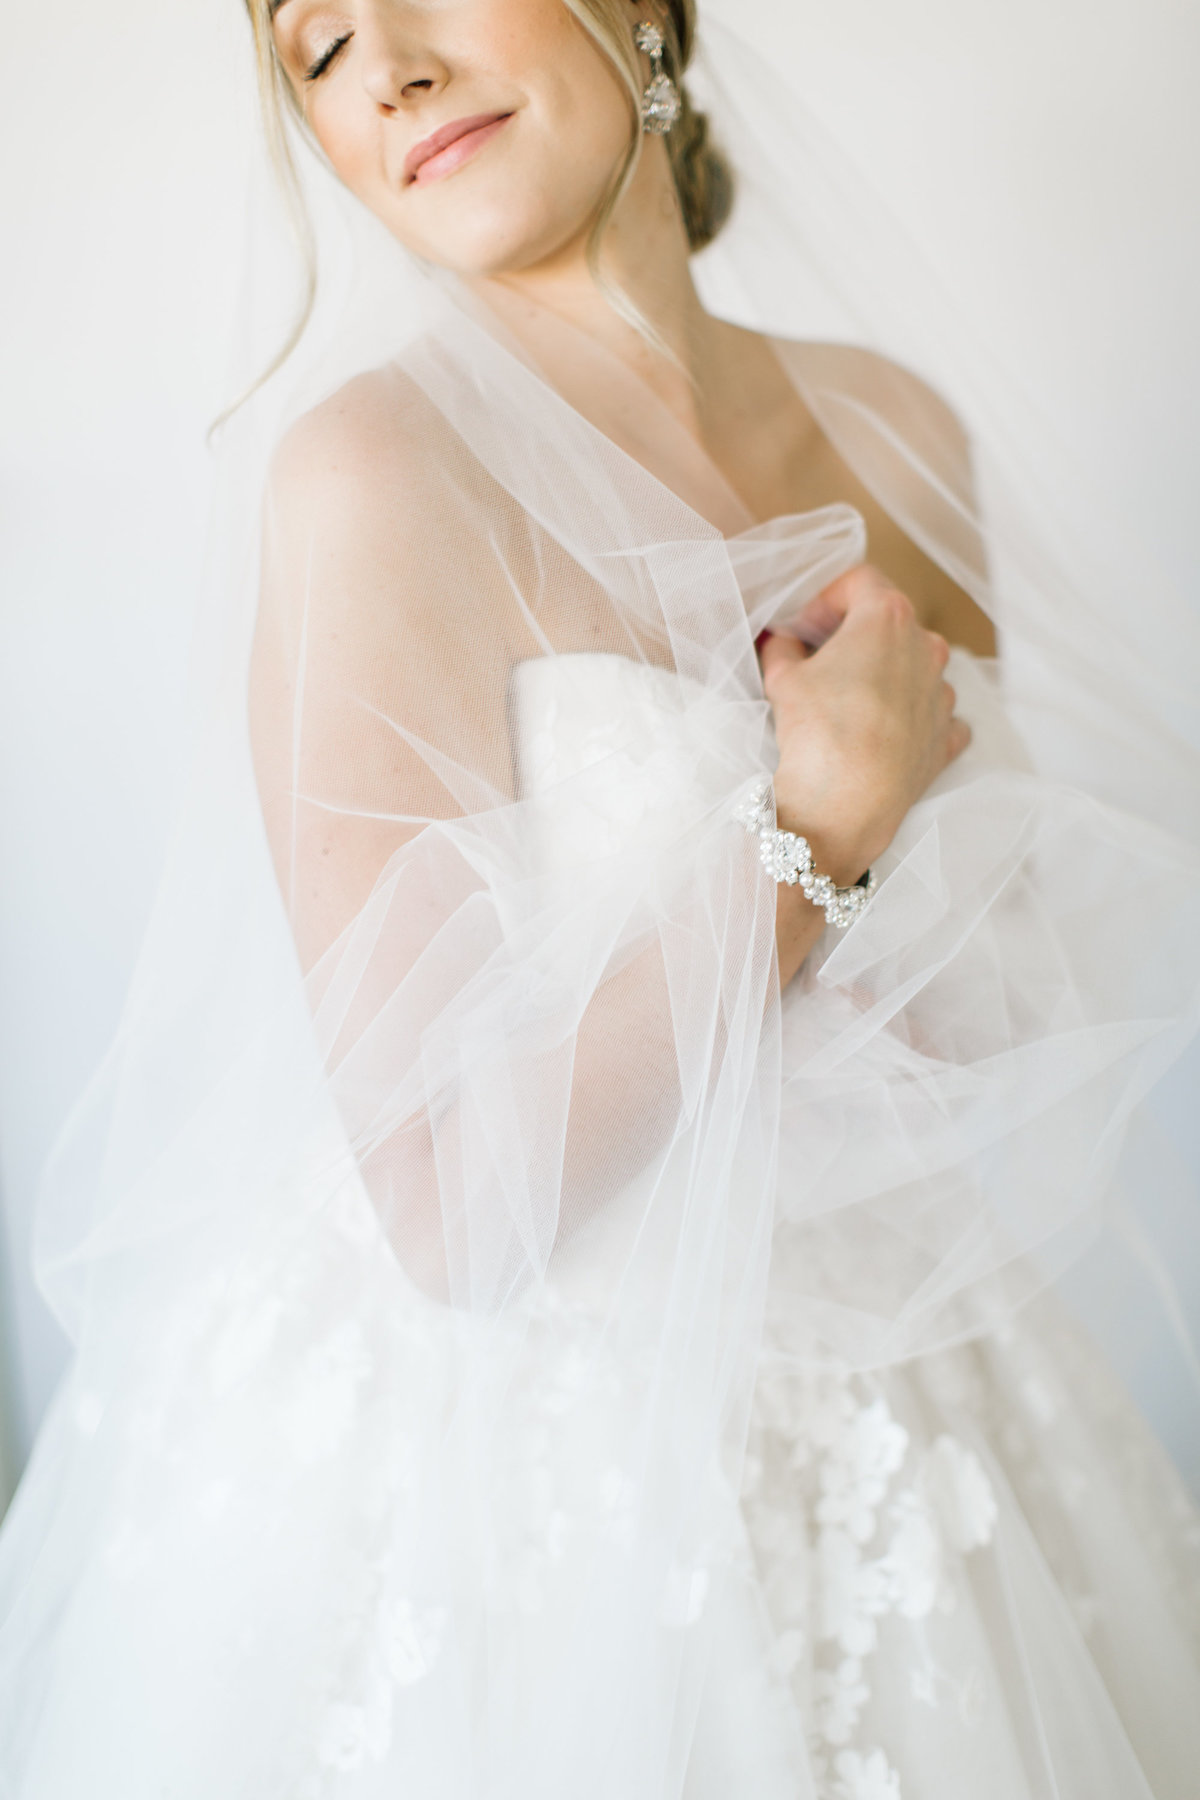 bride with veil and heirloom jewelry